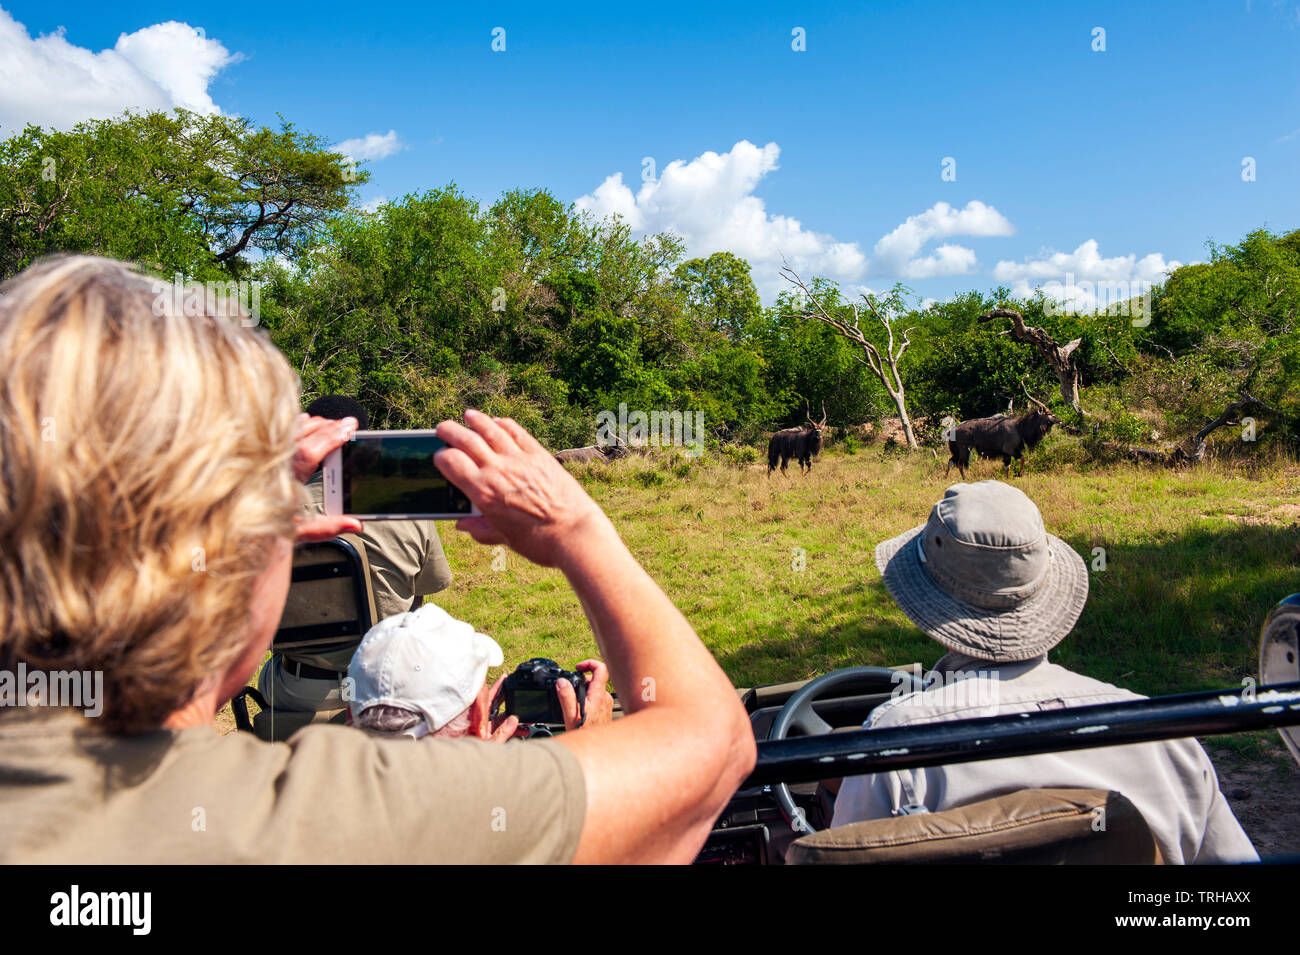 Tourists watch wildebeests on safari at the Phinda Private Game Reserve, an andBeyond owned nature reserve in eastern South Africa. Stock Photo